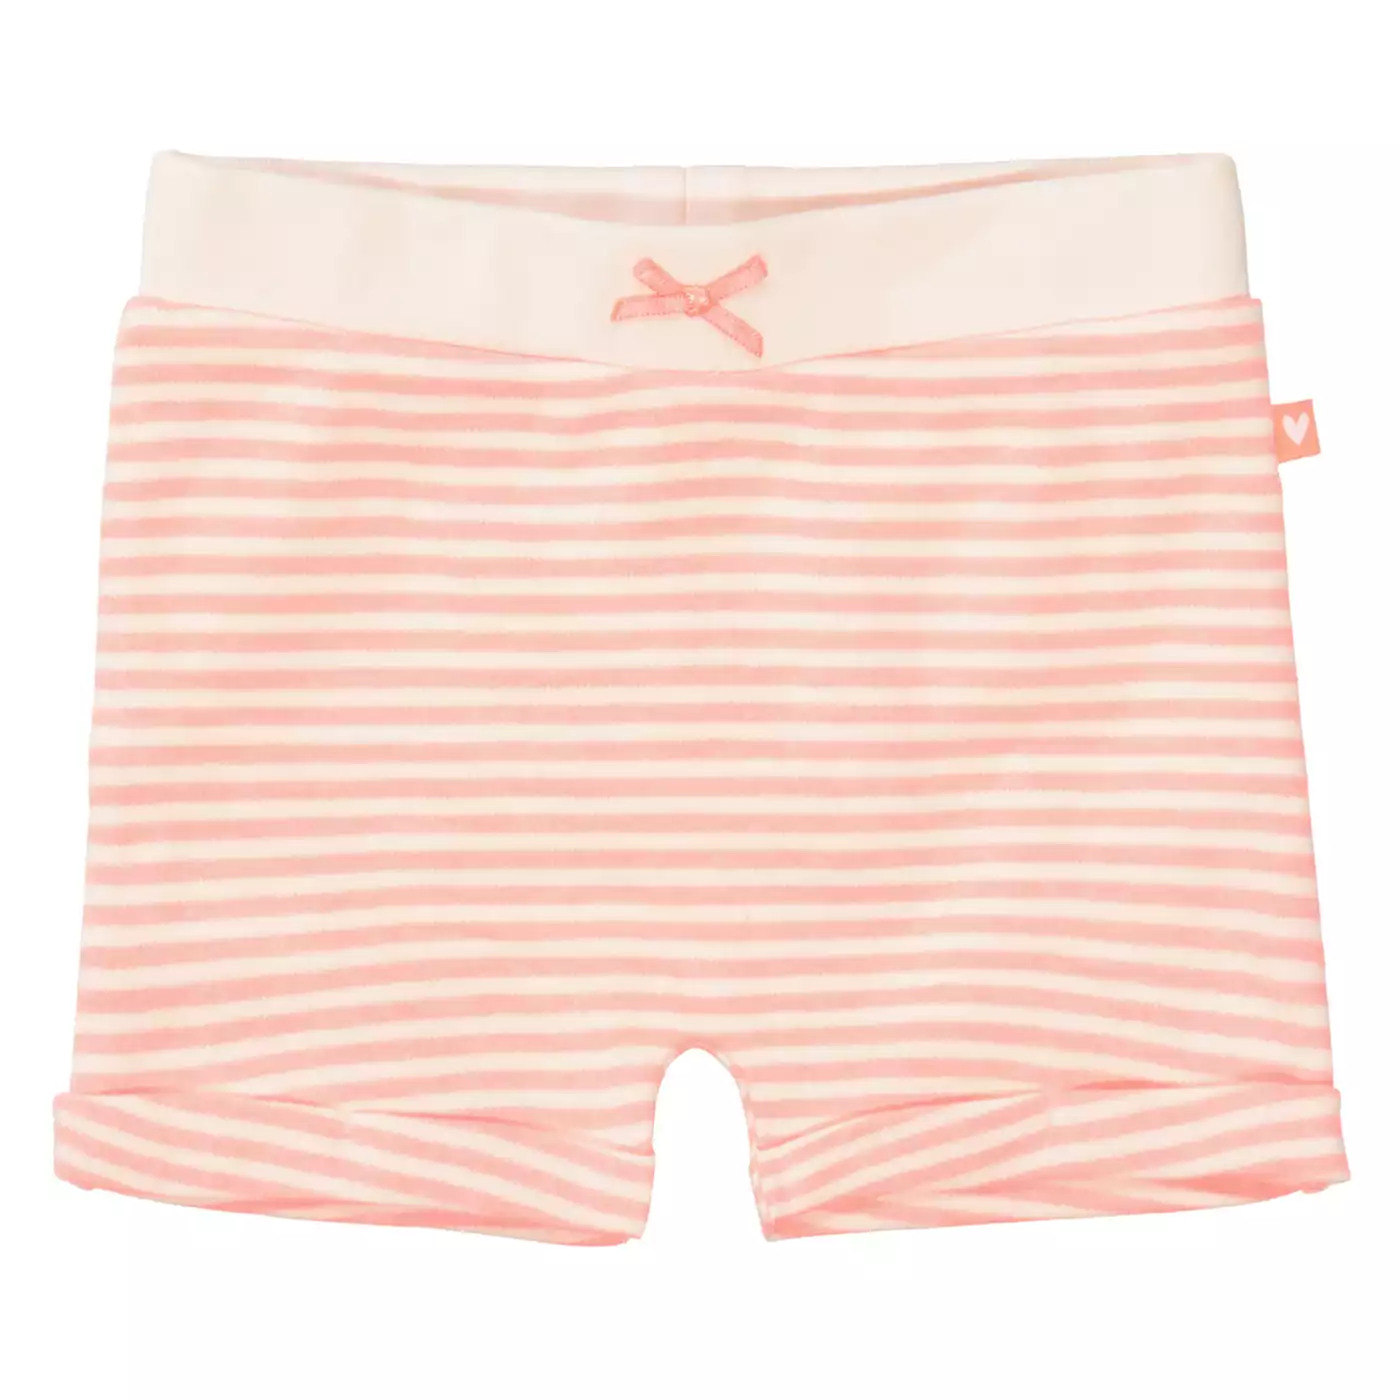 Shorts Neon Coral STACCATO Pink Rosa 2004580296103 1